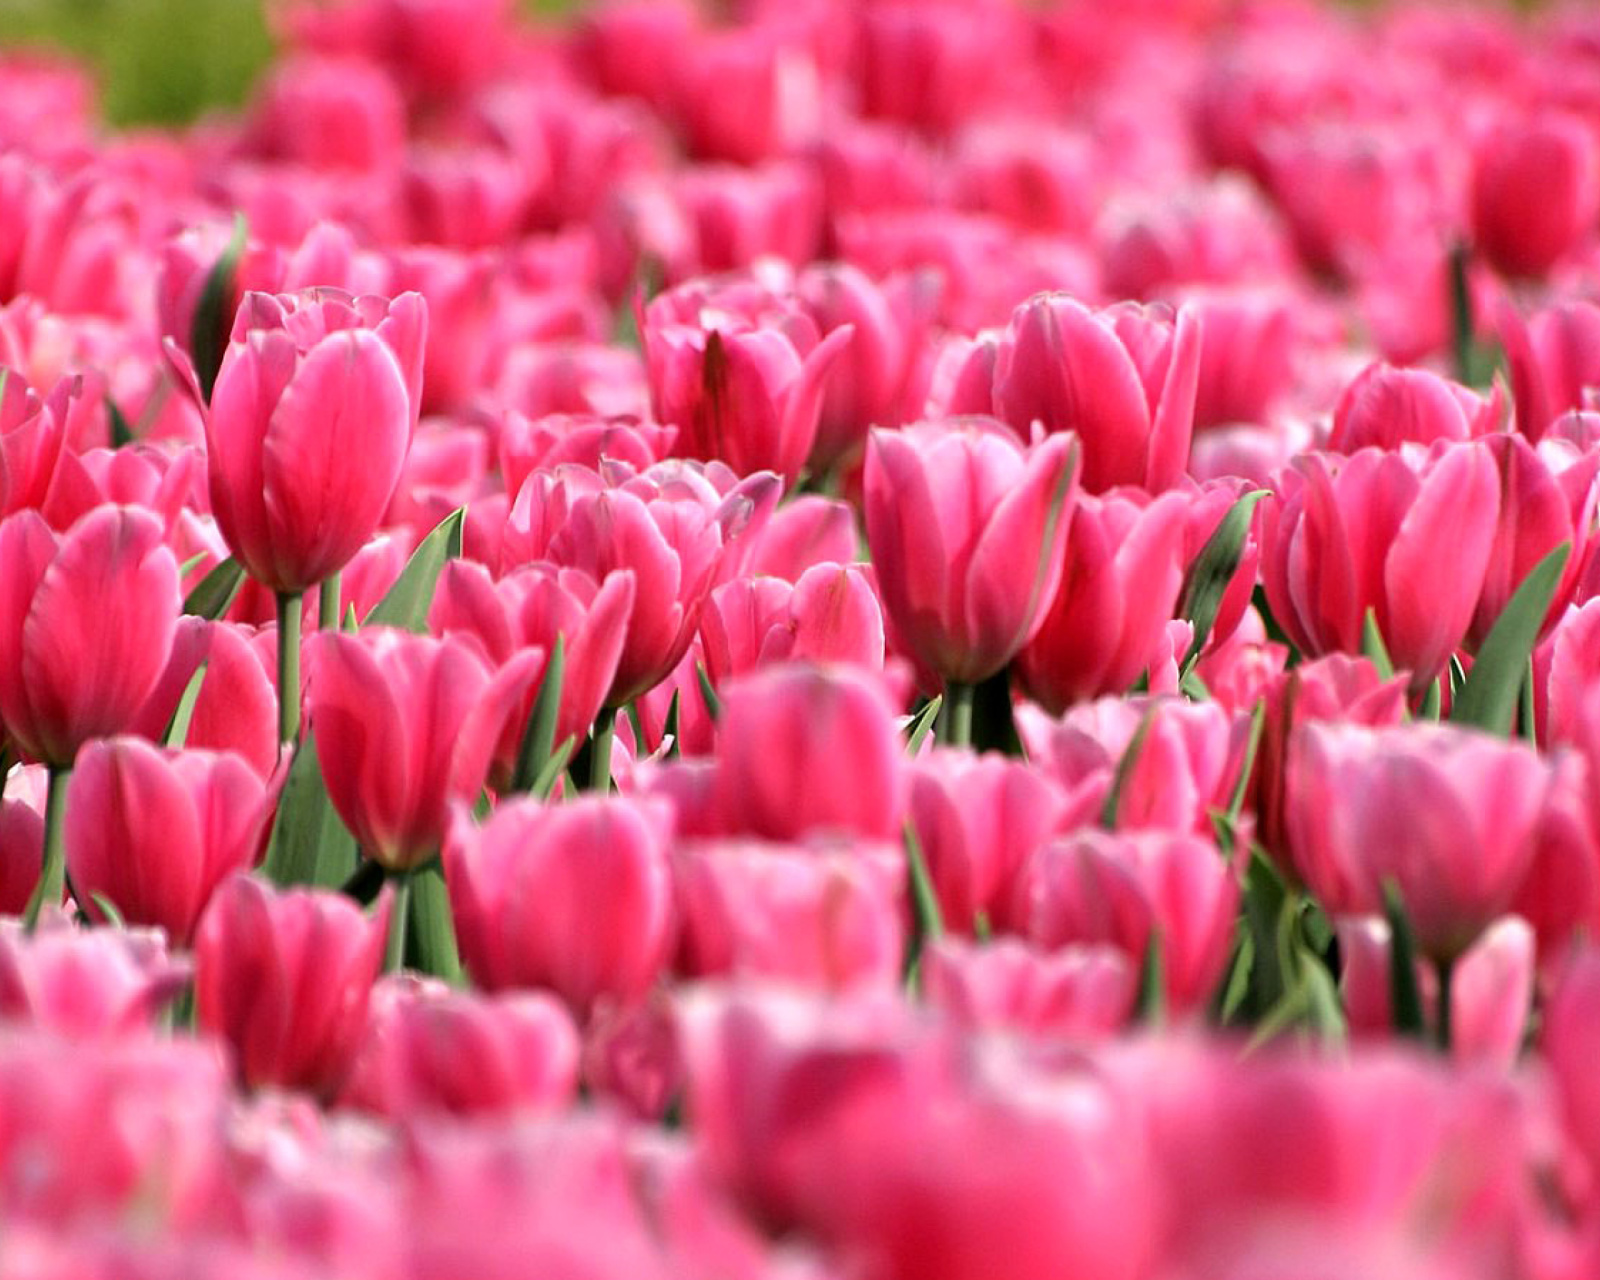 Das Pink Tulips in Holland Festival Wallpaper 1600x1280